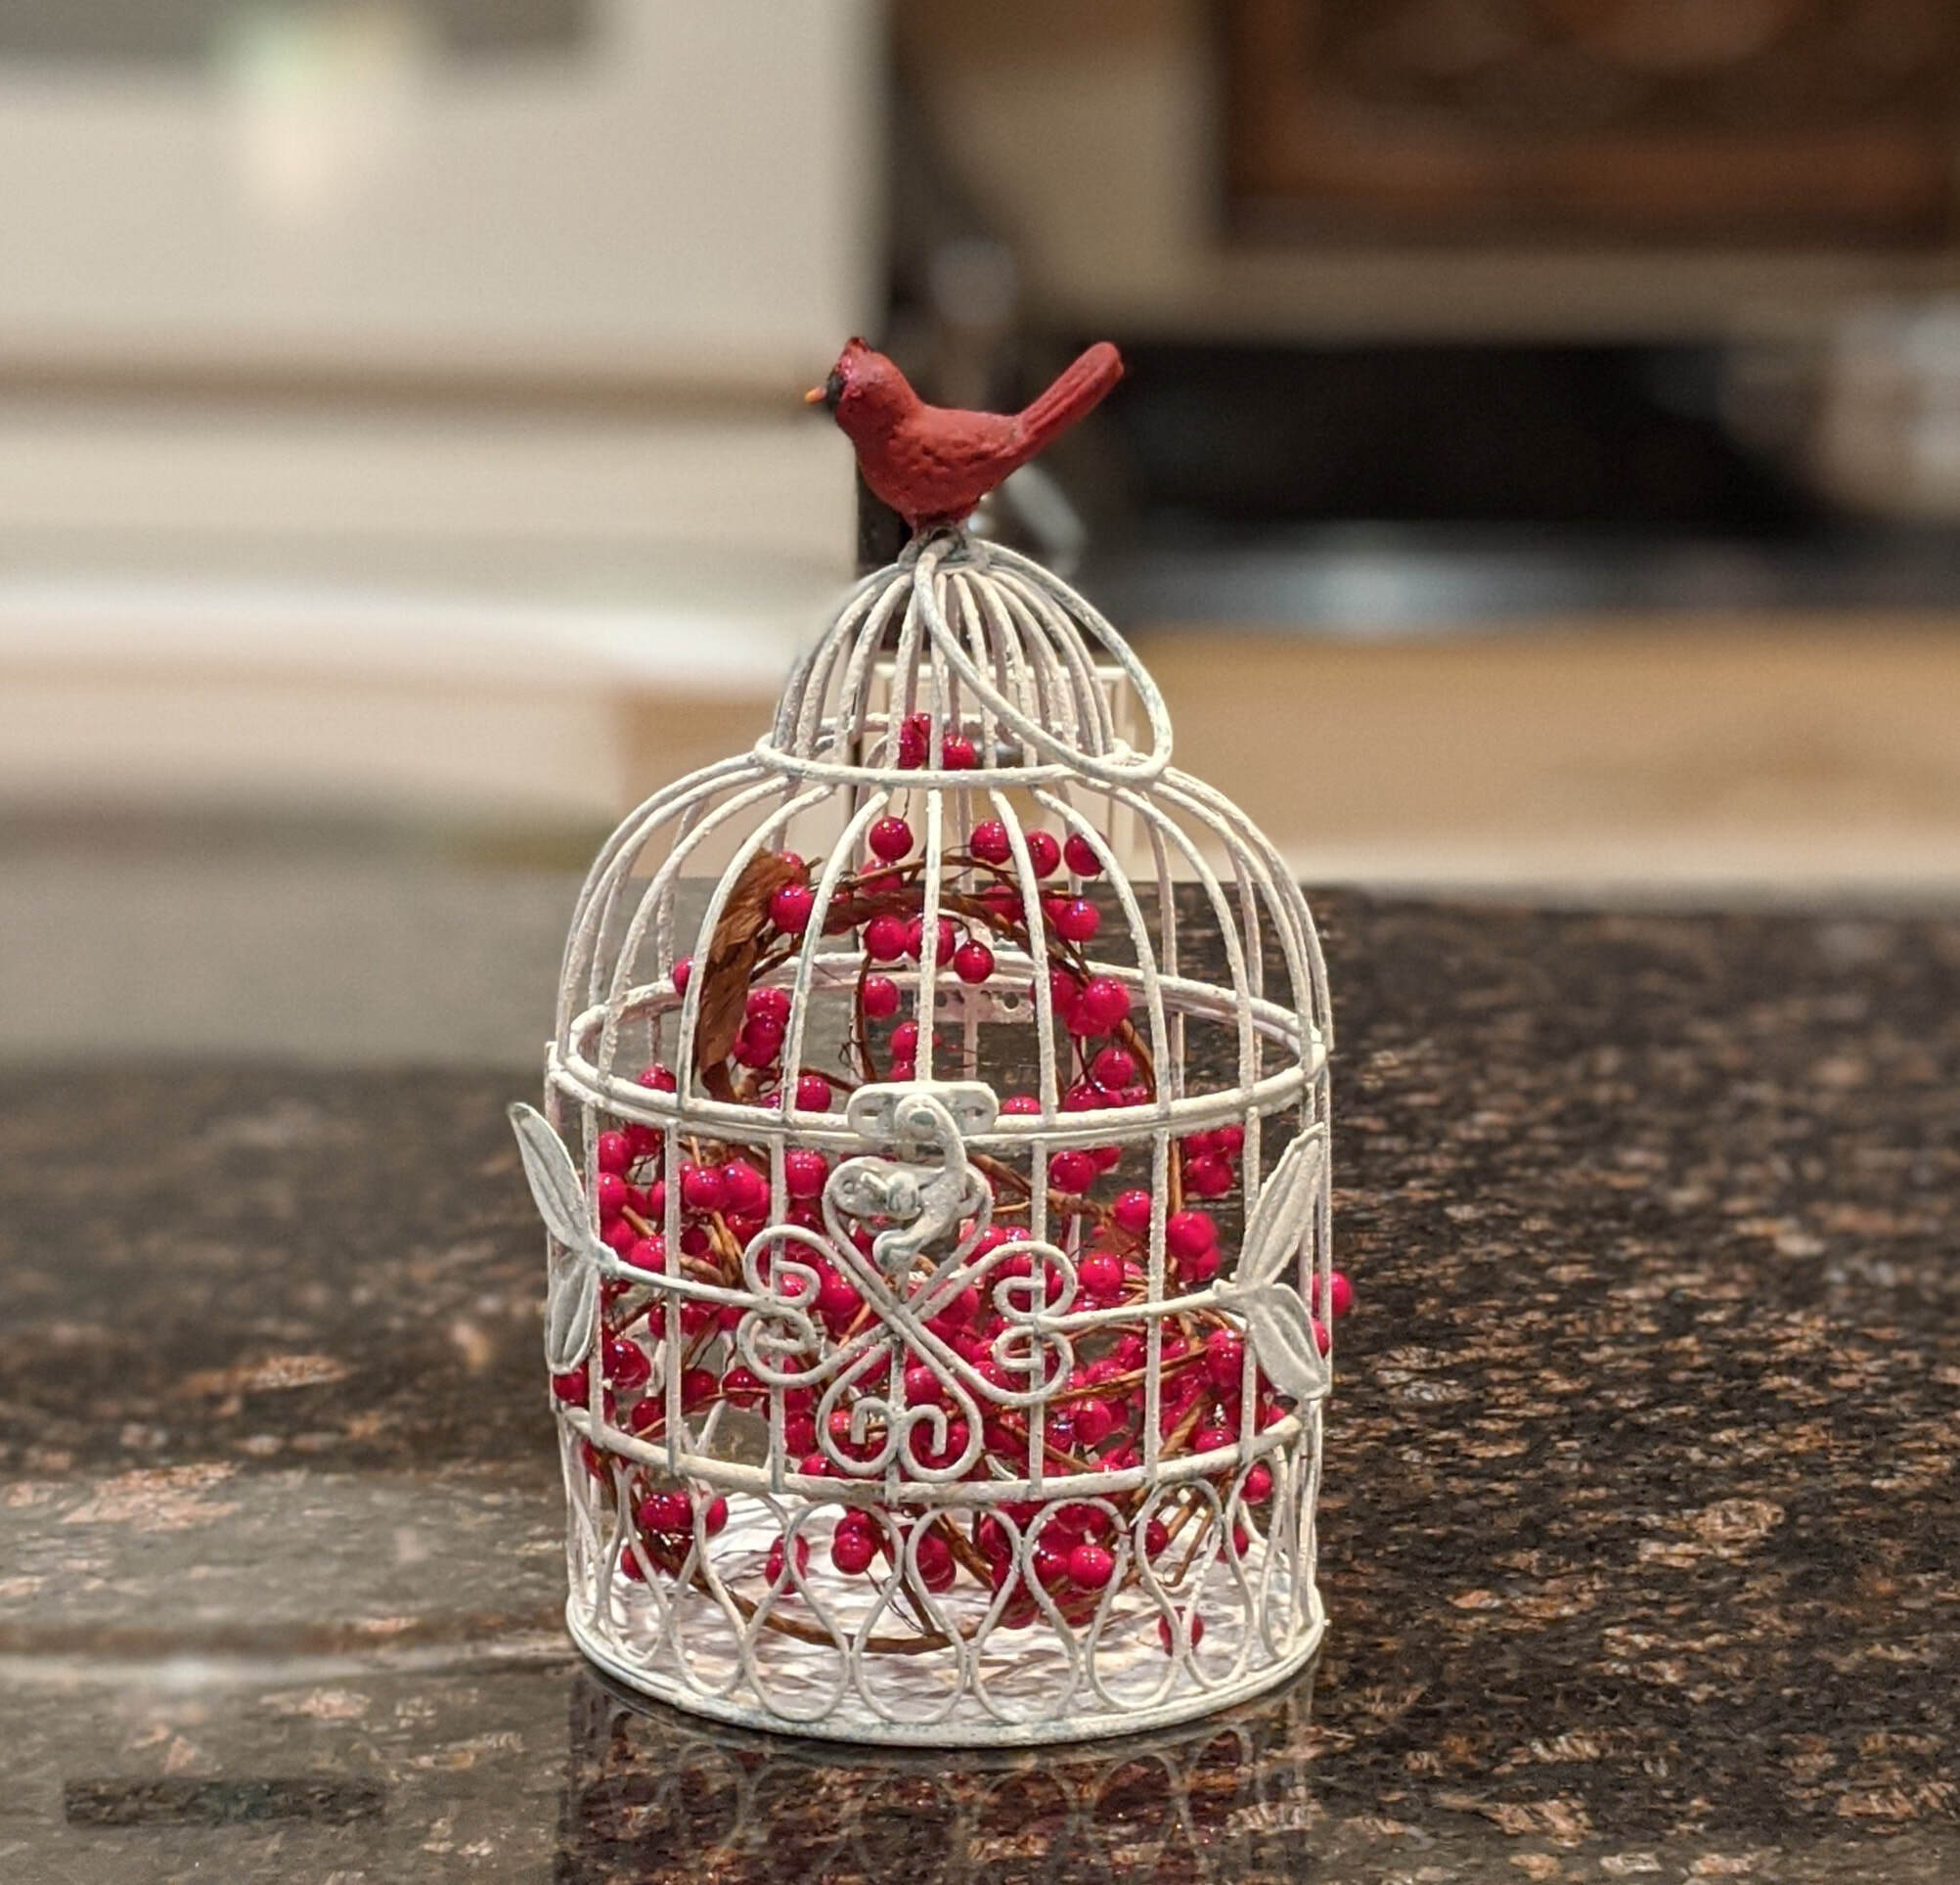 Shabby Chic Painted White Birdcage w/ Red Cardinal and Winterberry